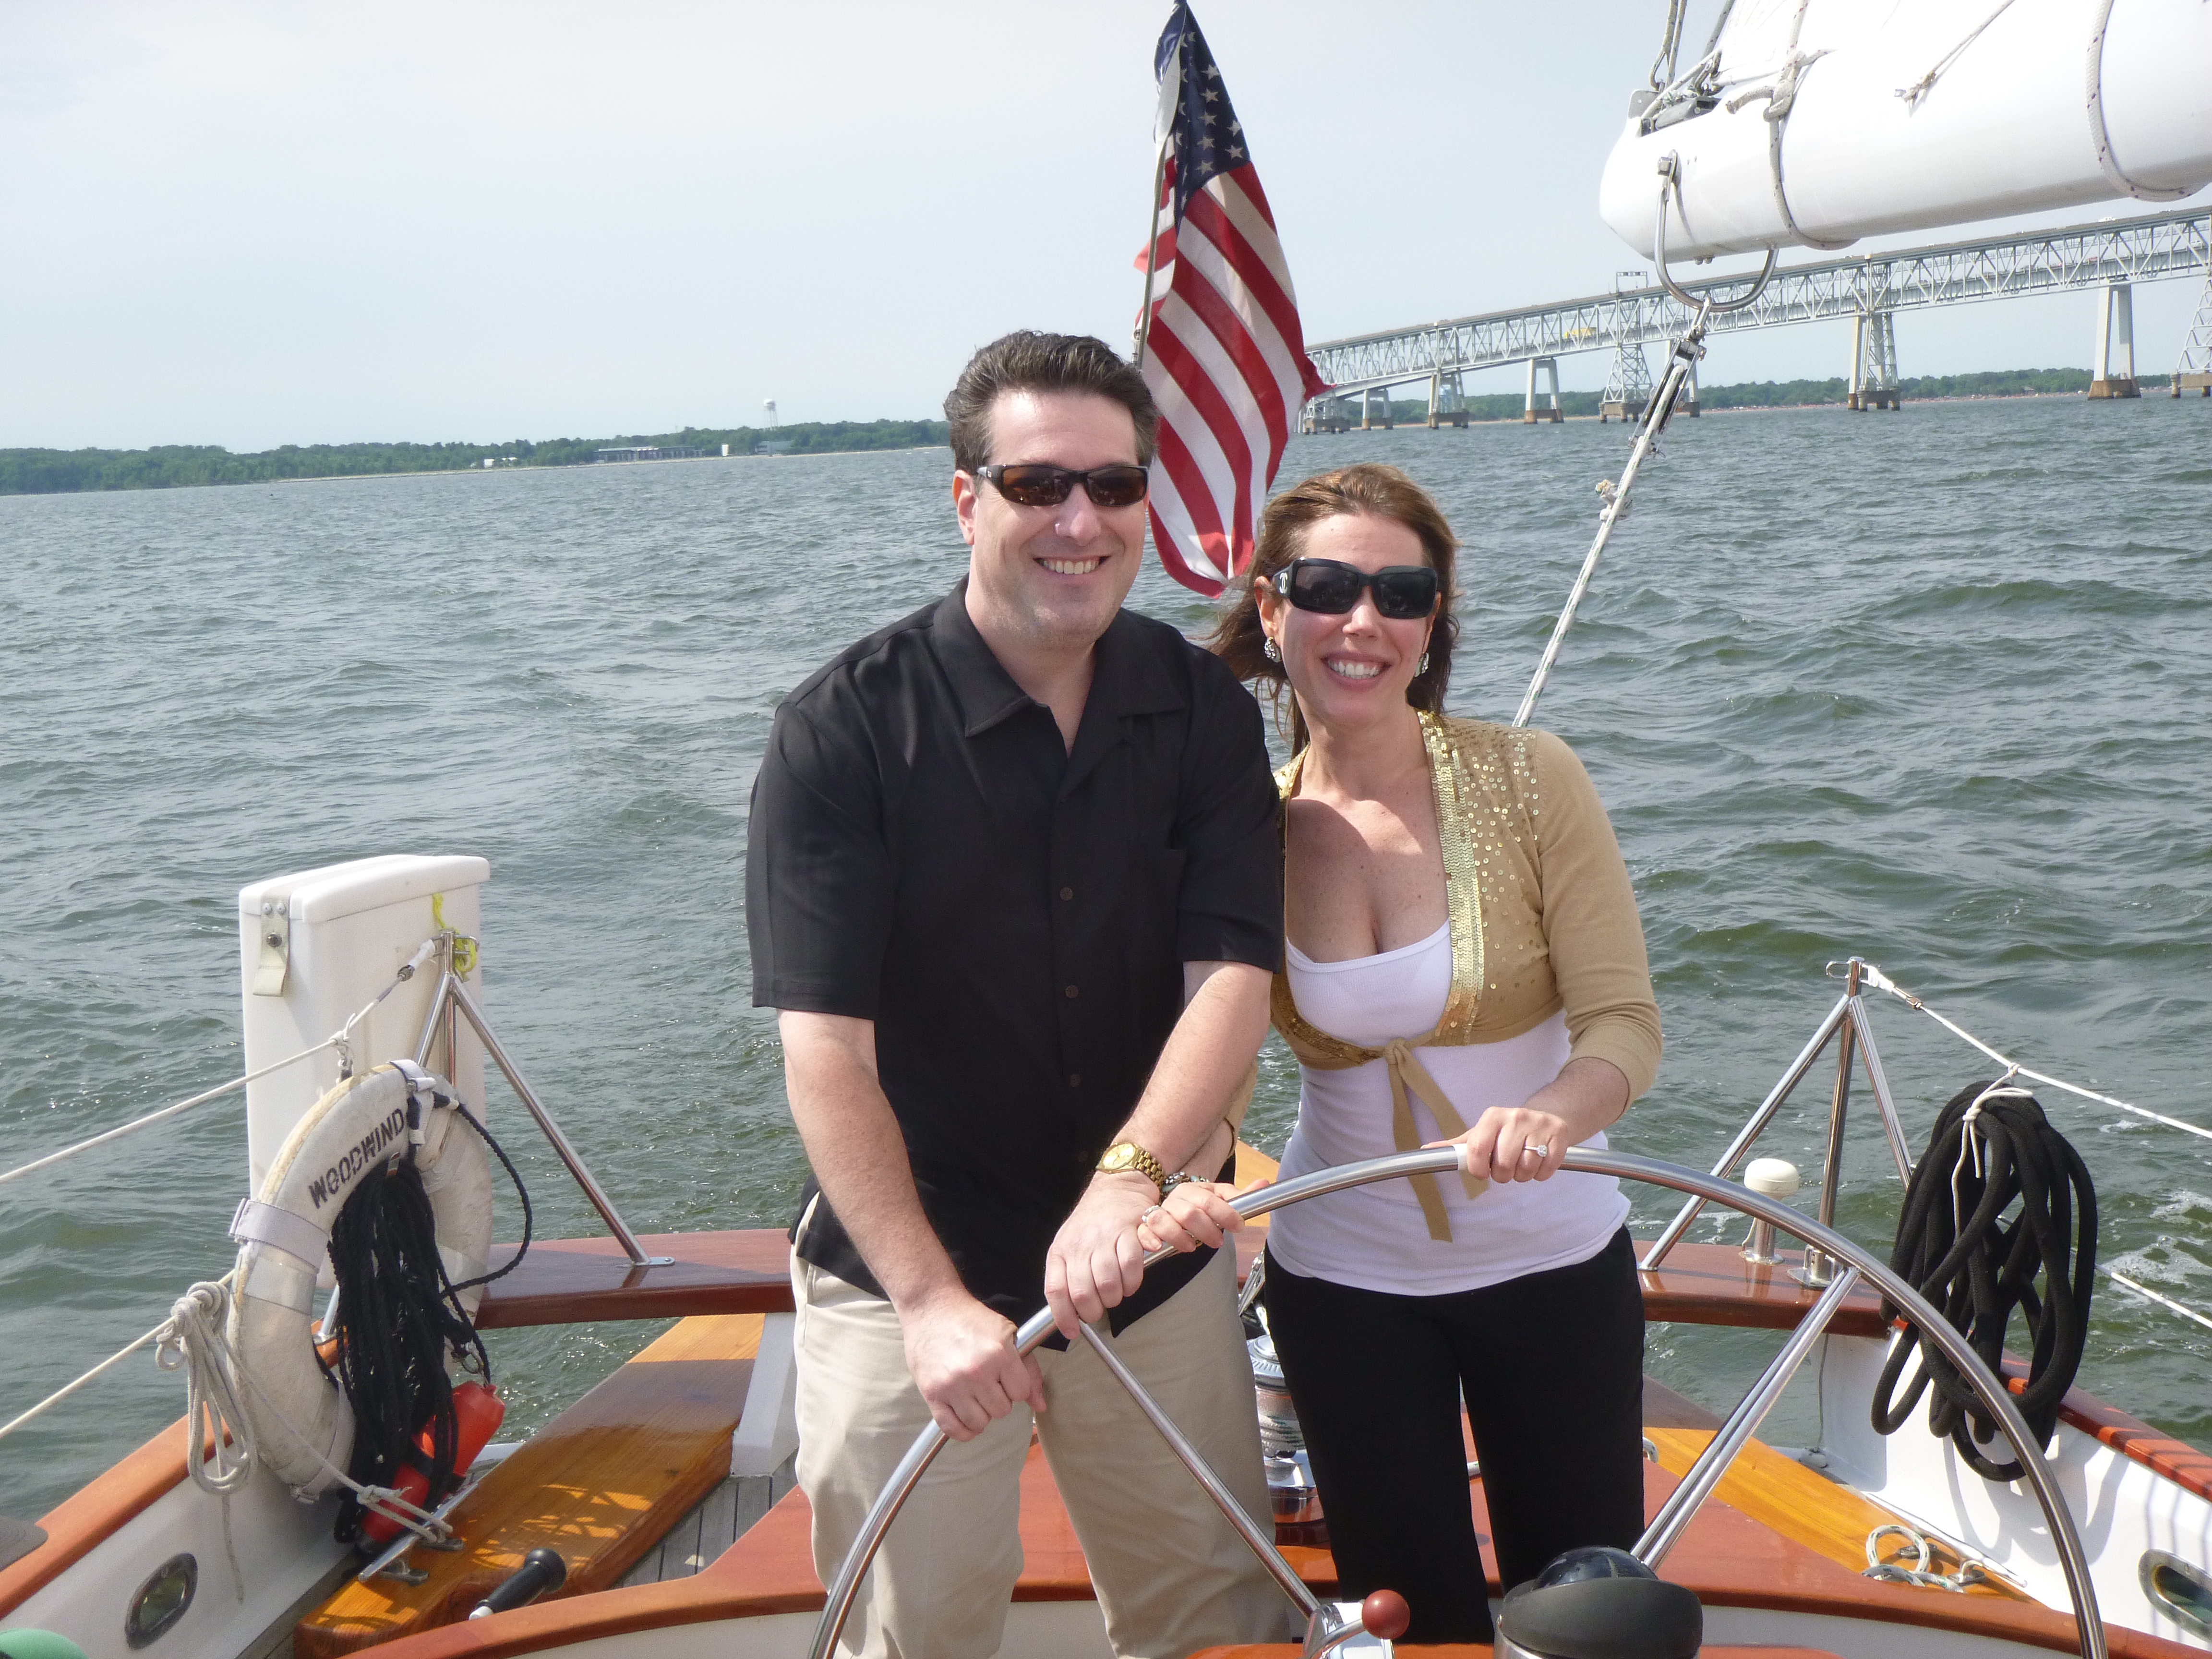 Look at those smiles. Dee and Dave just got engaged on the schooner!